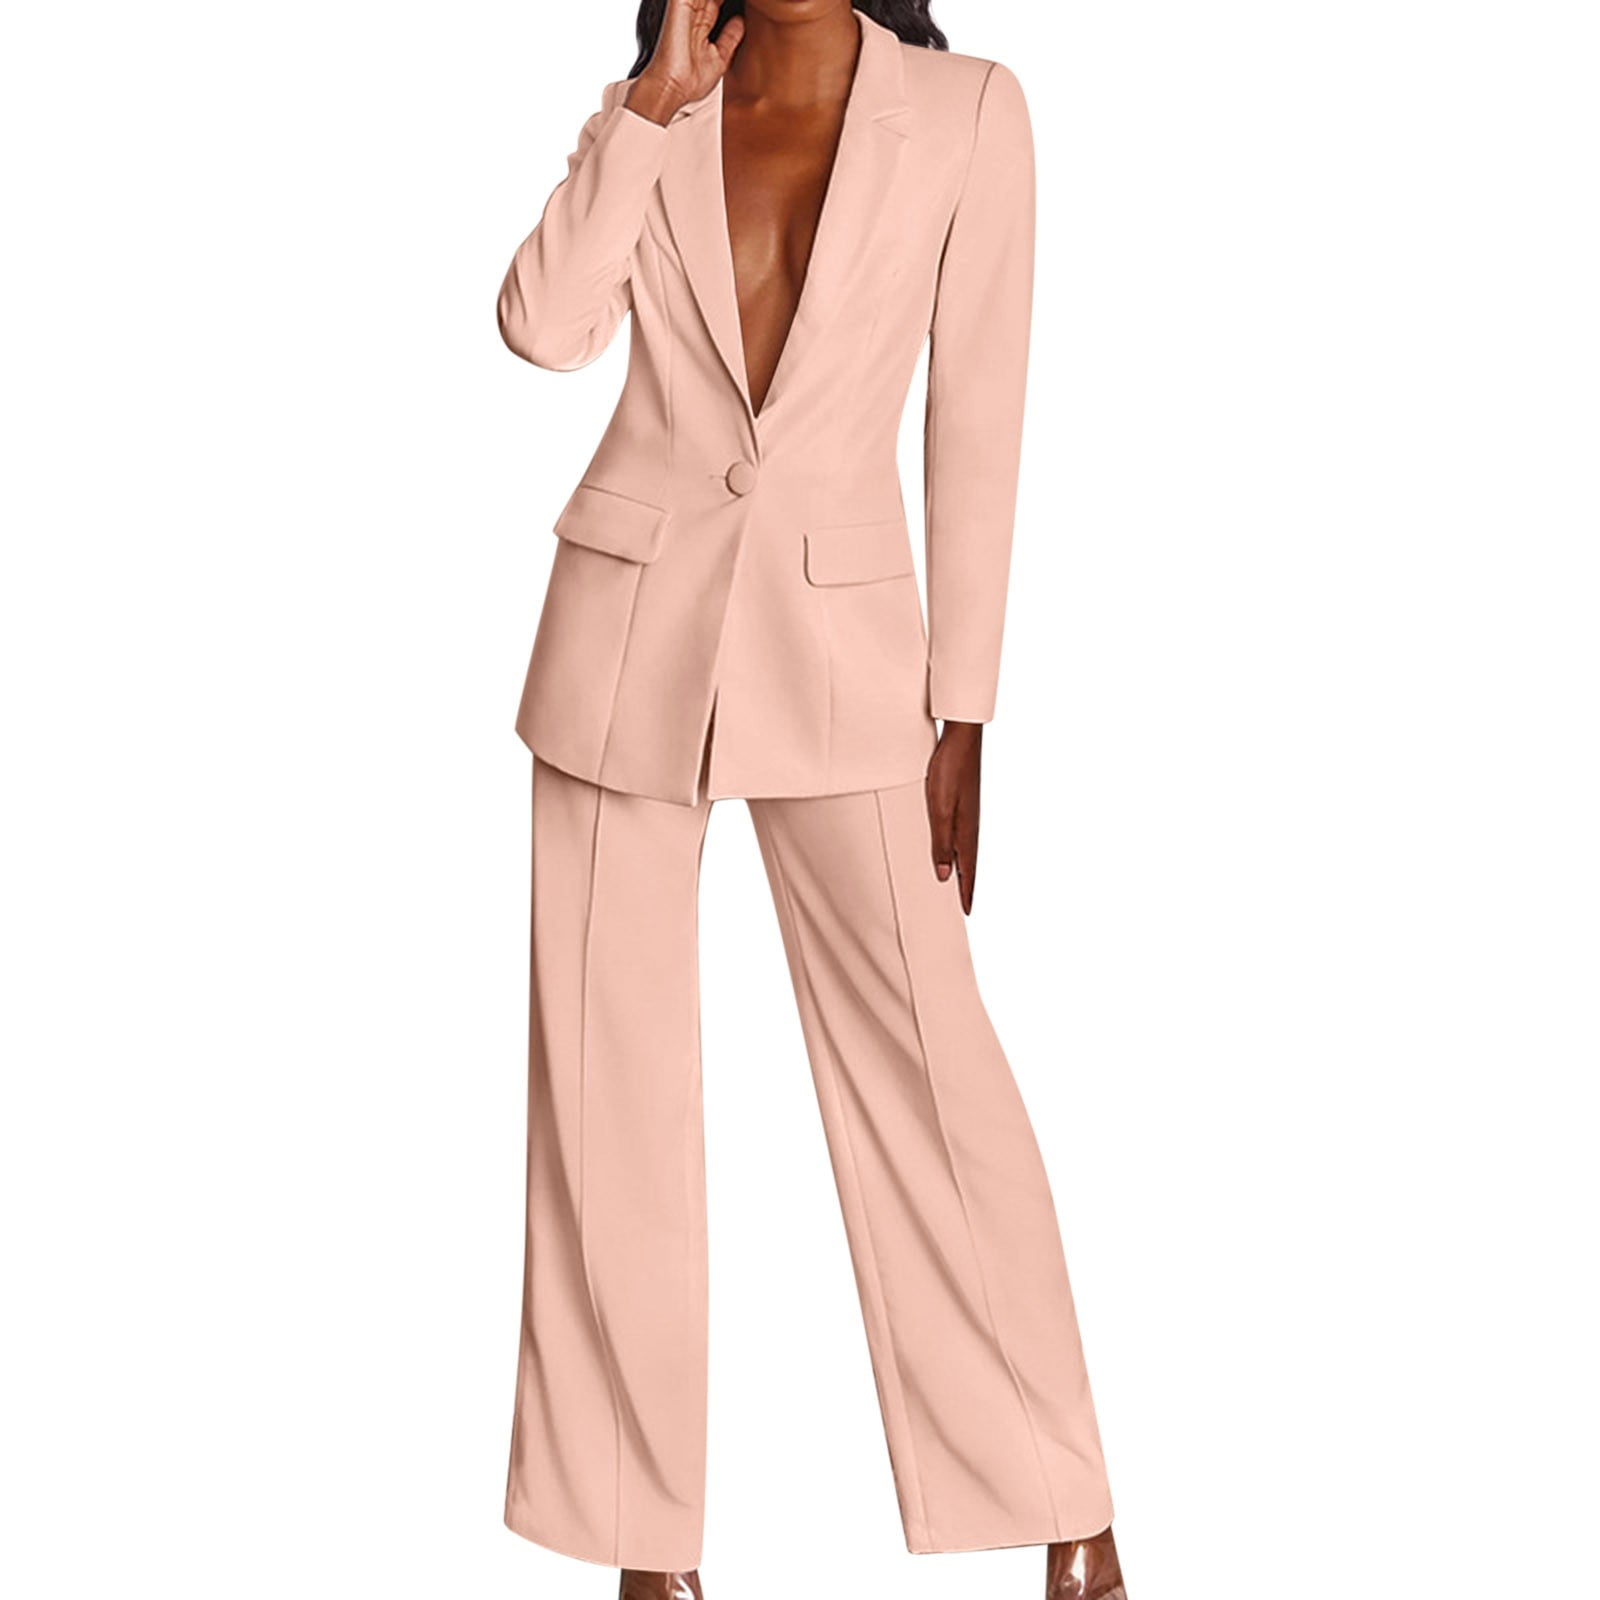 NKOOGH Dressy Pant Suits for A Wedding Guest Jumper for Women Women'S  Casual Solid Long Sleeve Suits Button Coat High Waist Long Pant Two Piece  Set